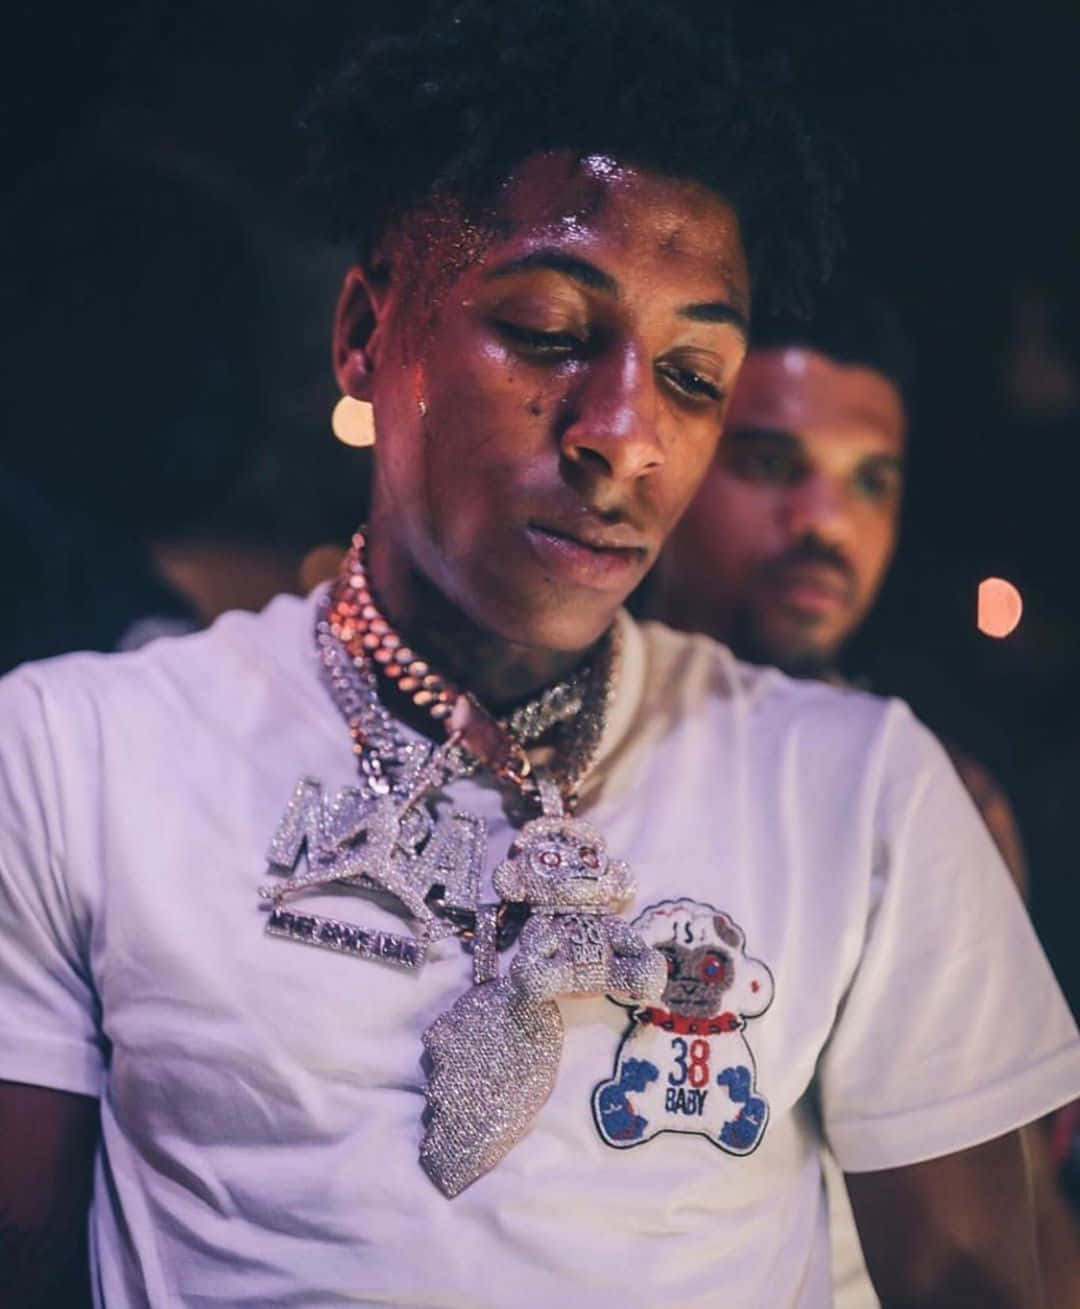 NBA Youngboy '38 Baby 2' Album Cover